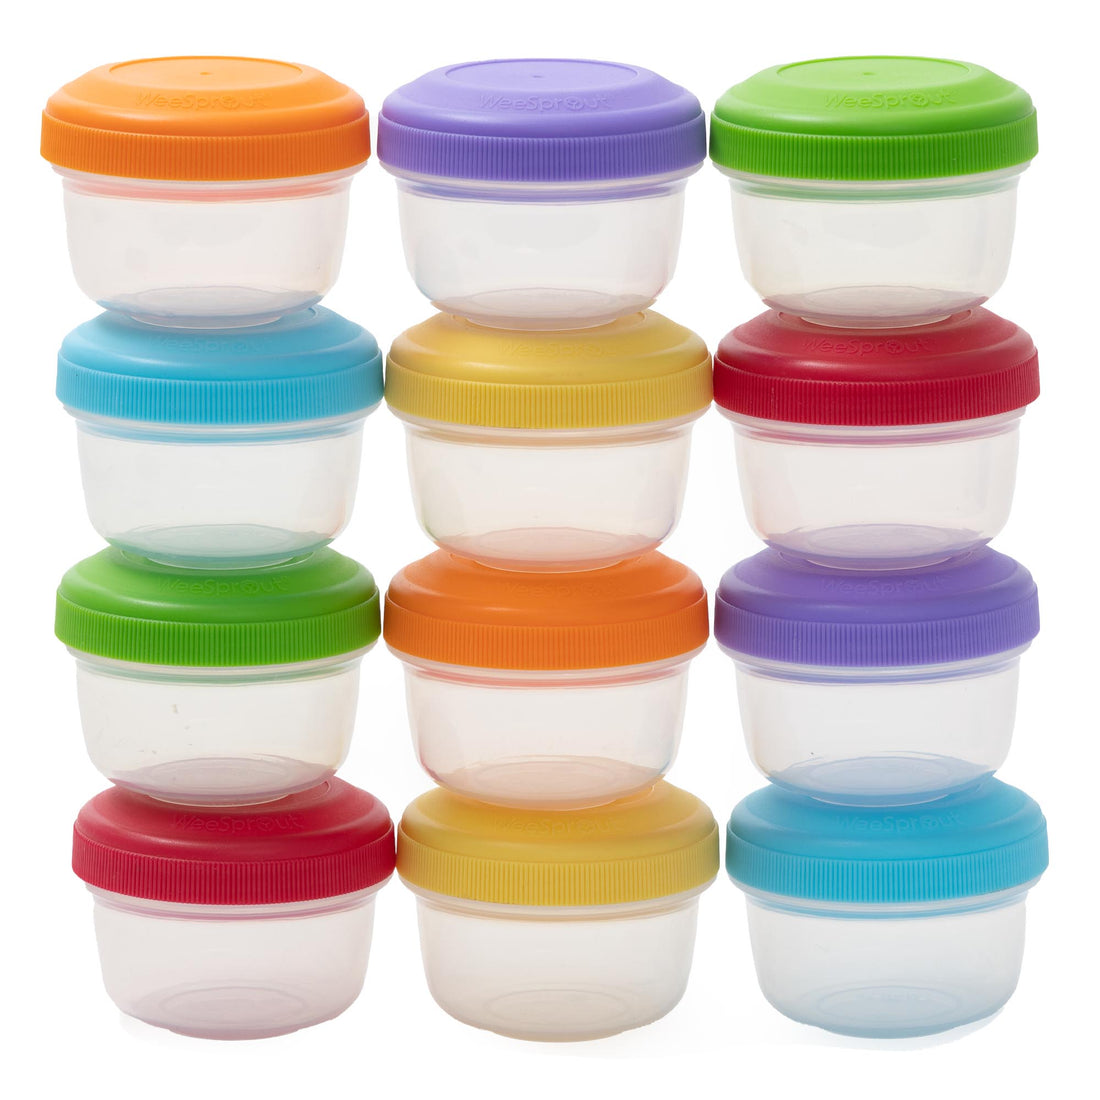 How to Sterilize Plastic Containers